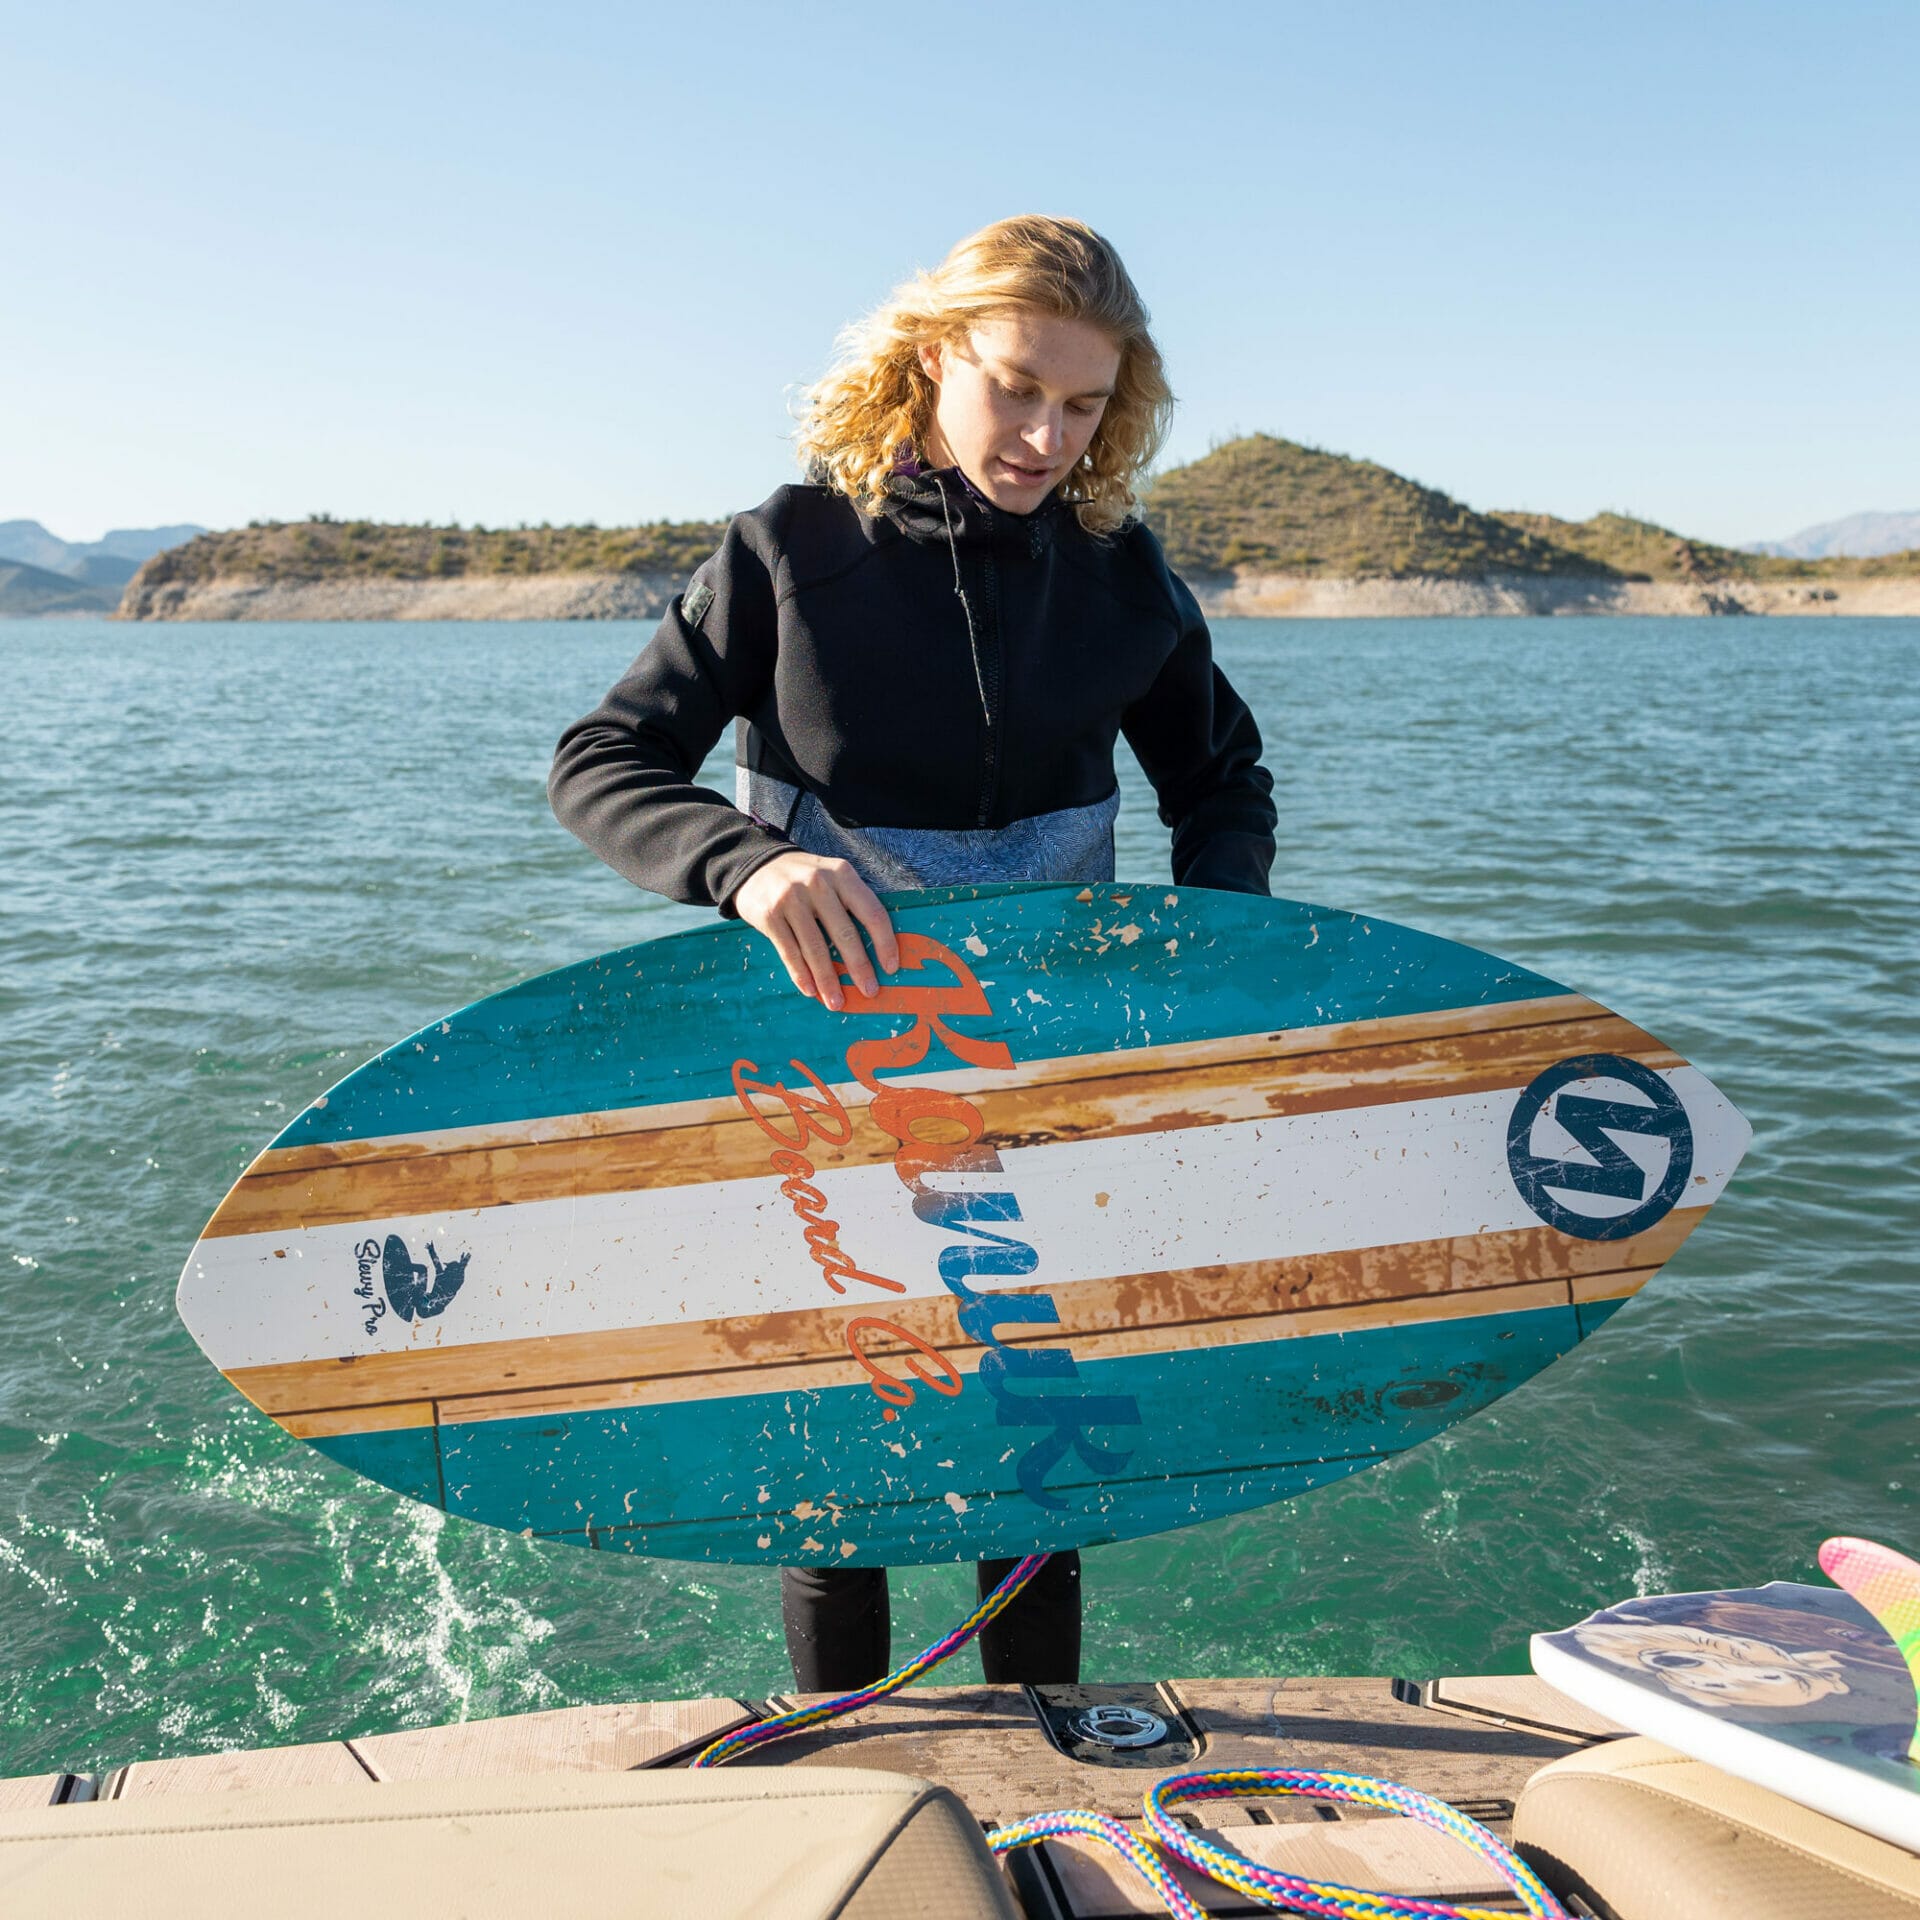 A woman holding a wakesurf board on a boat.